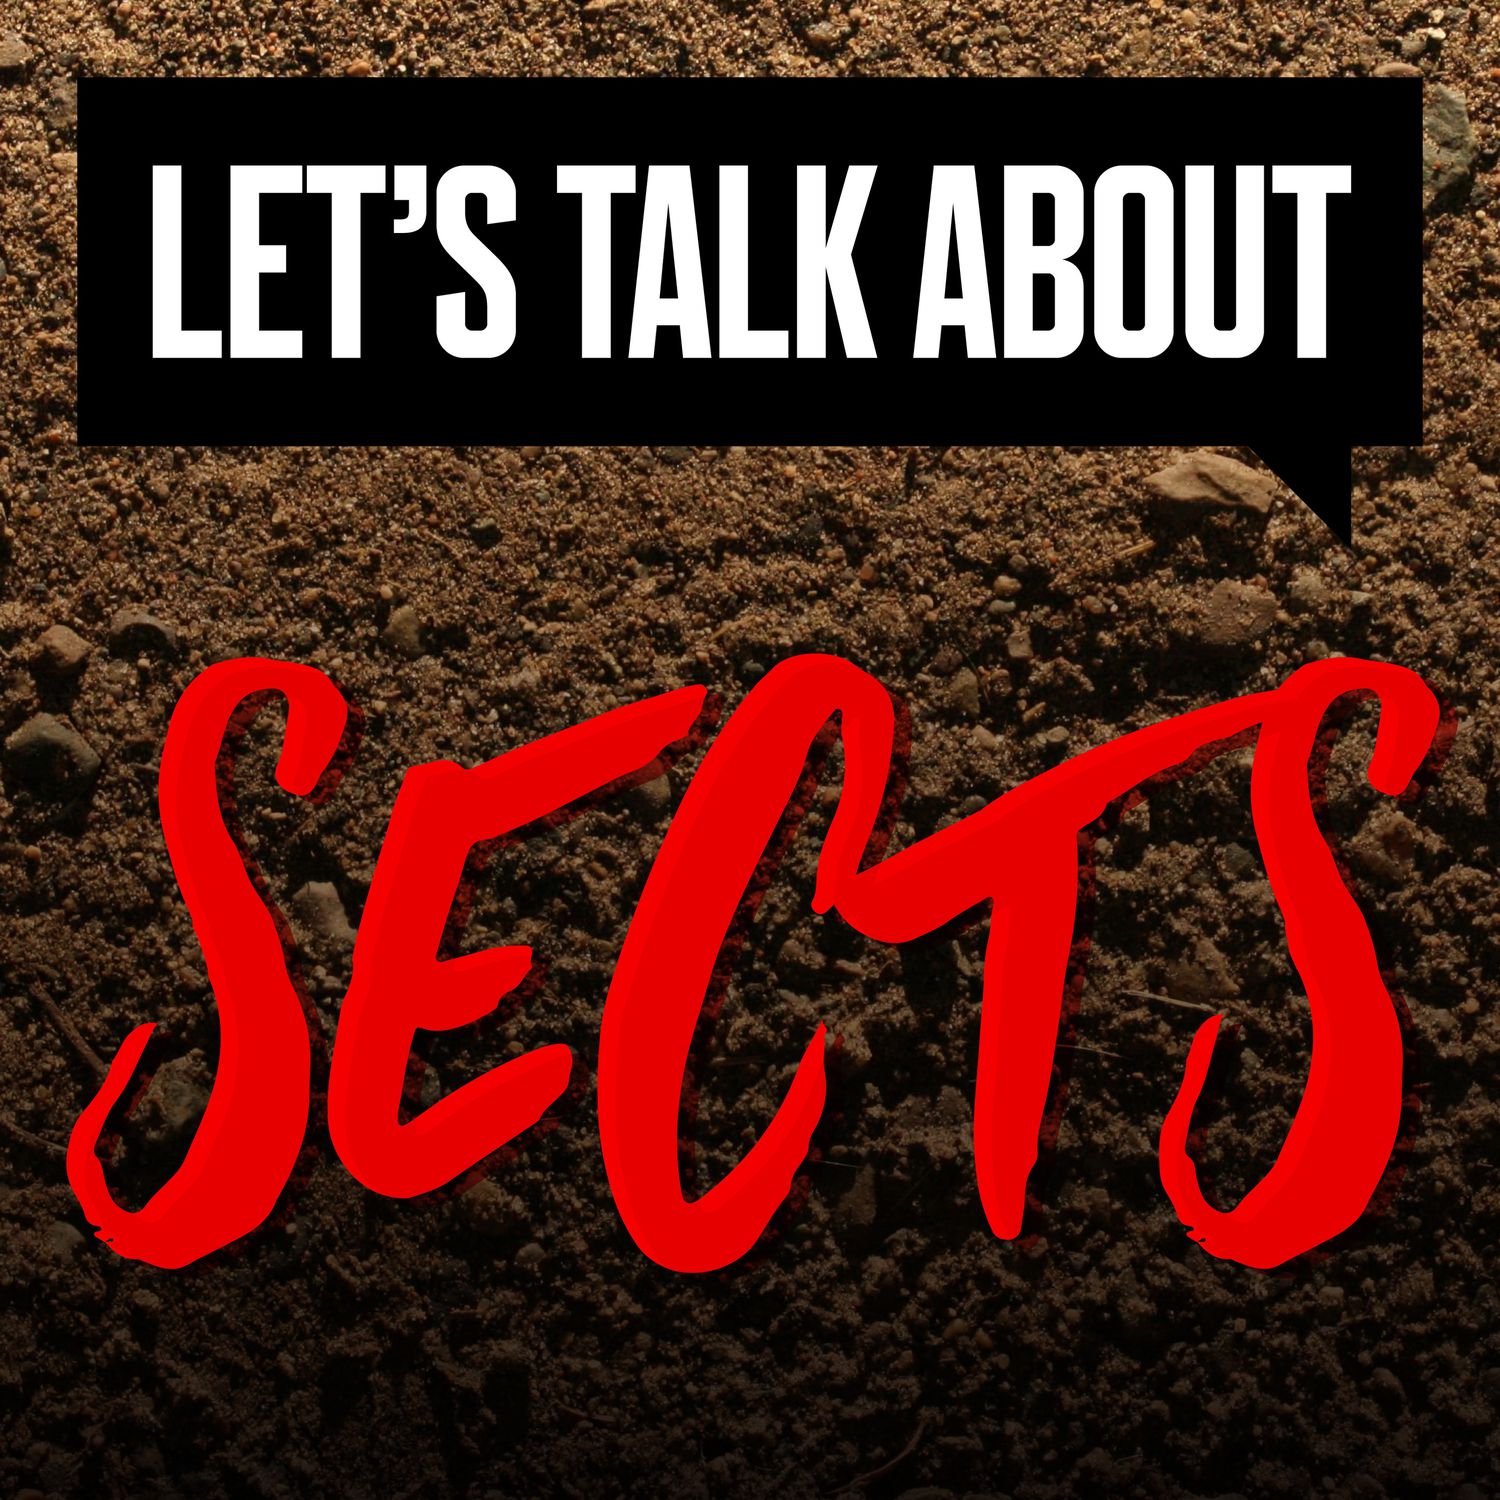 Let's Talk About Sects podcast show image